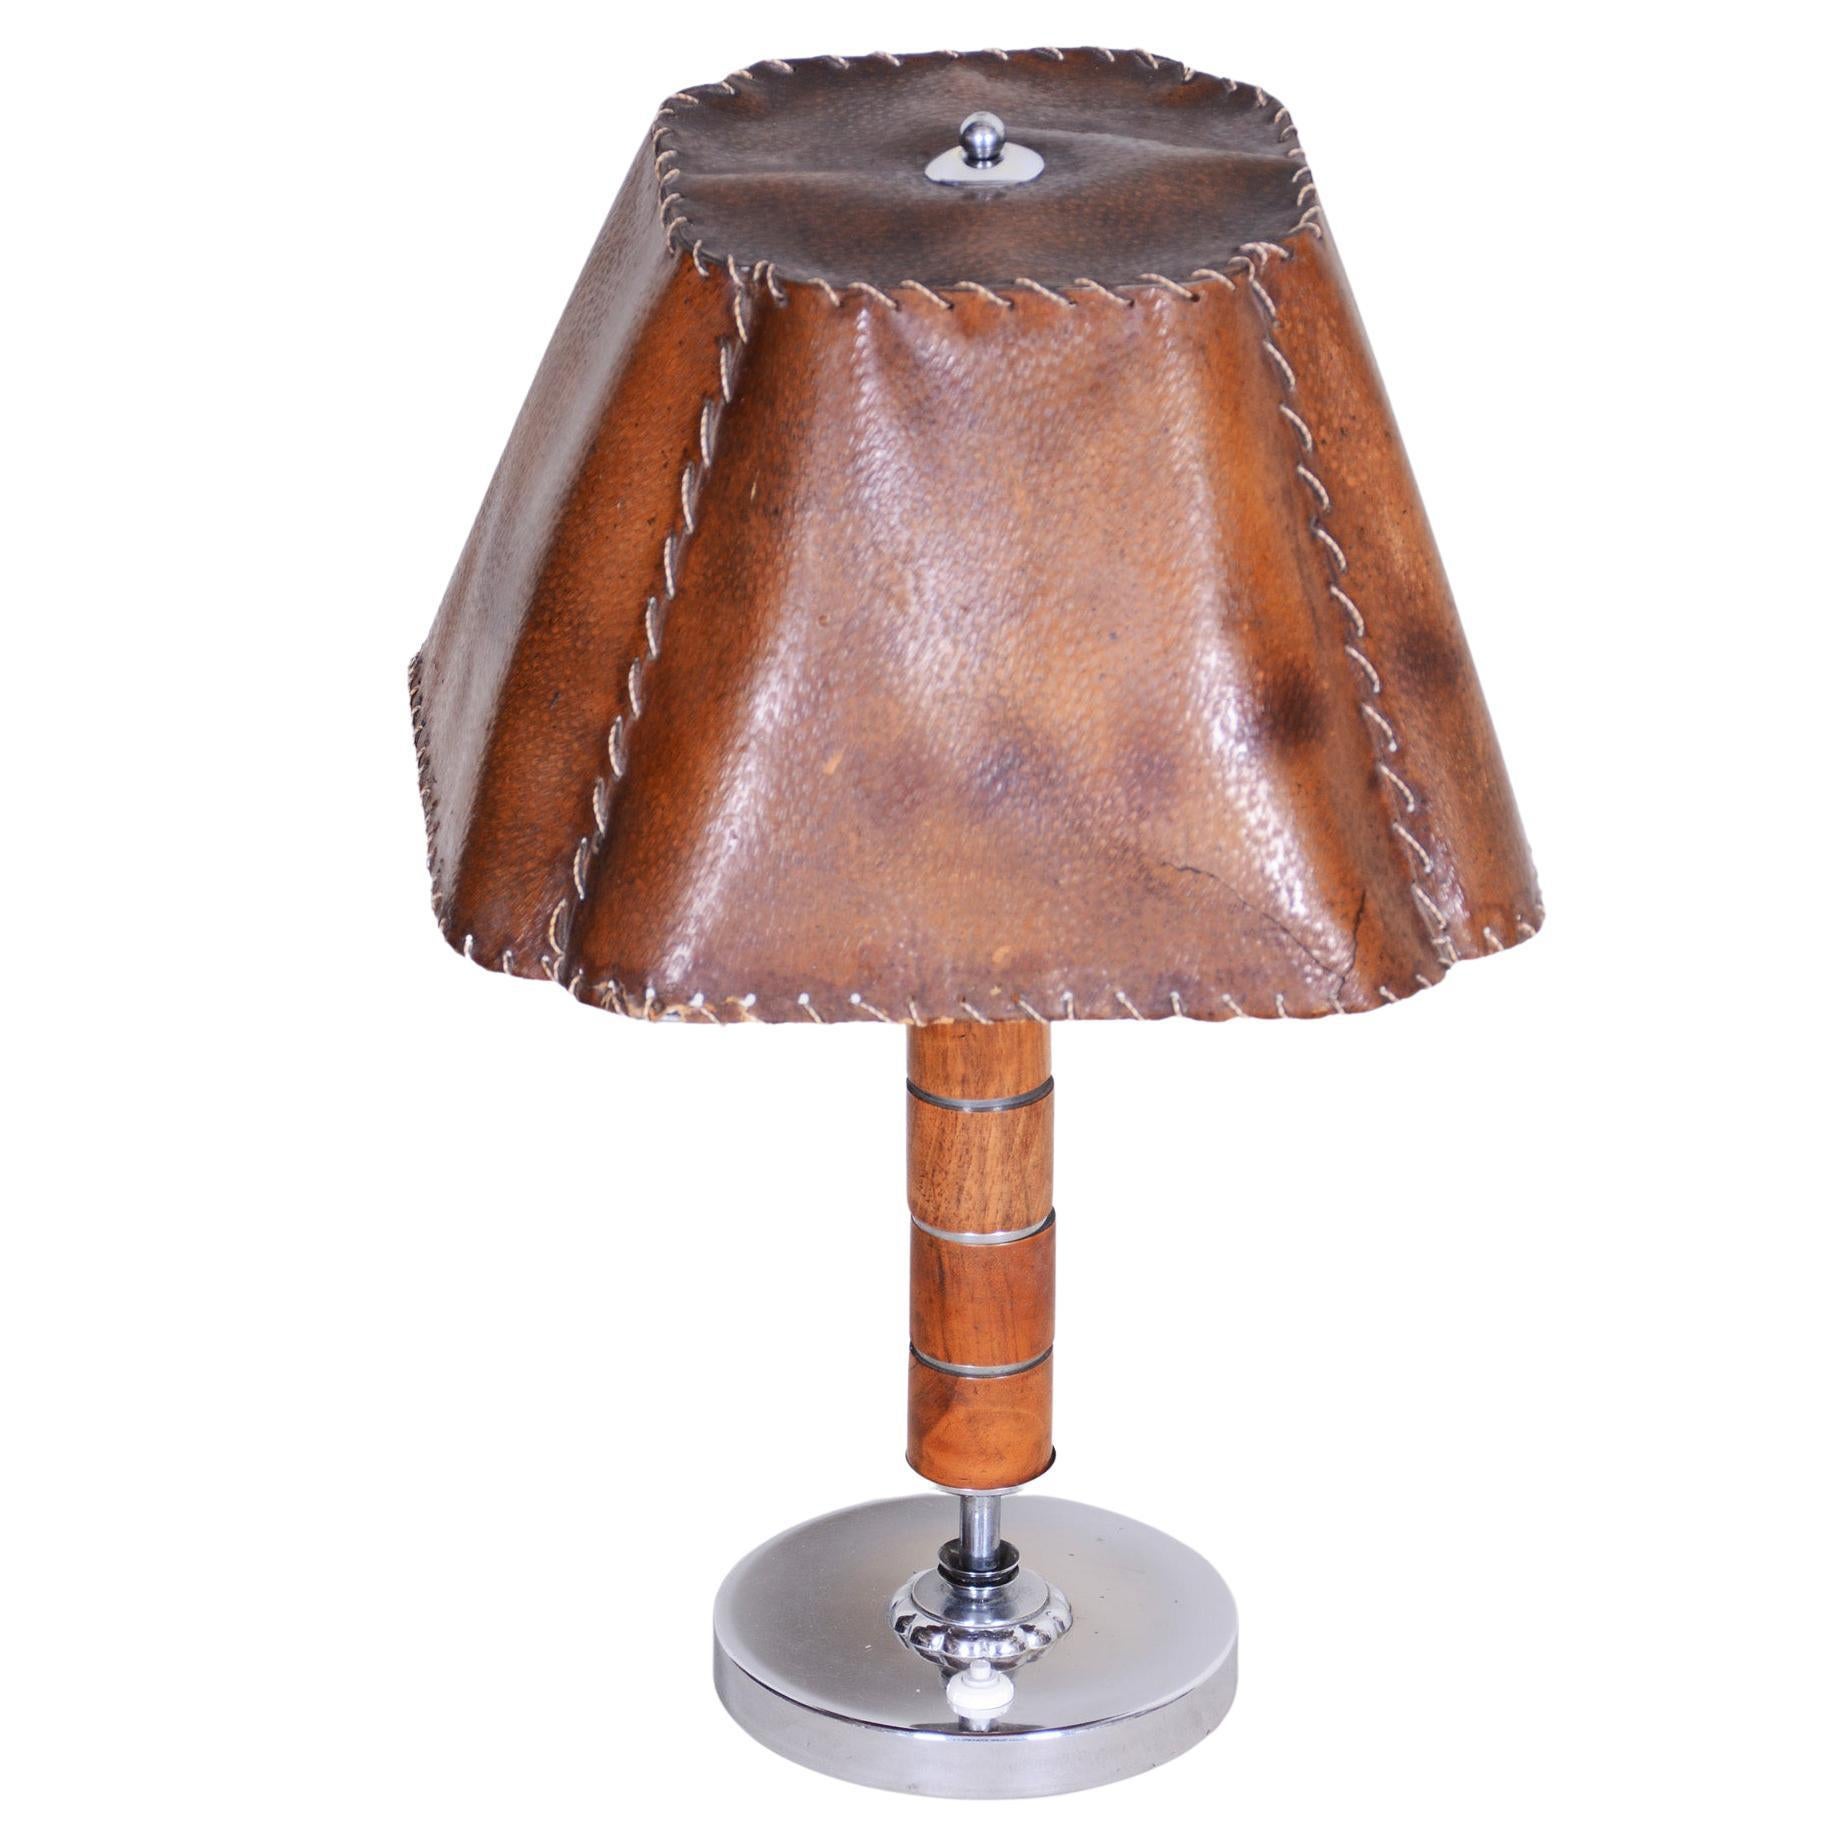 Czech Art Deco Table Lamp, Fully Restored, 1920s, Walnut, Chrome and Parchment For Sale